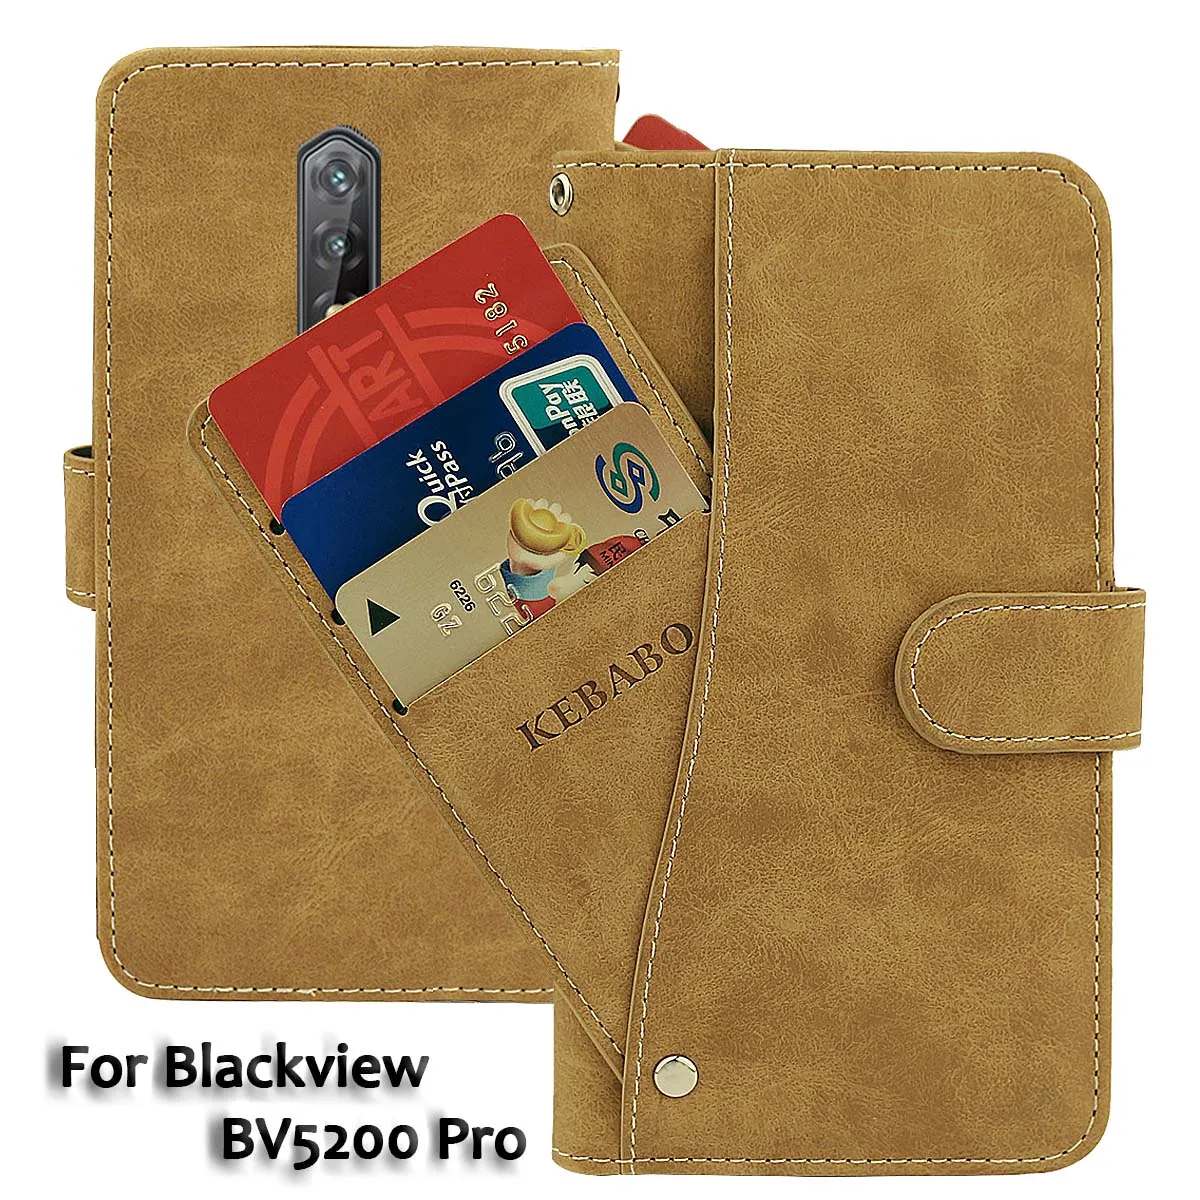 

Vintage Leather Wallet Blackview BV5200 Pro Case 6.1" Flip Luxury Card Slots Cover Magnet Phone Protective Cases Bags